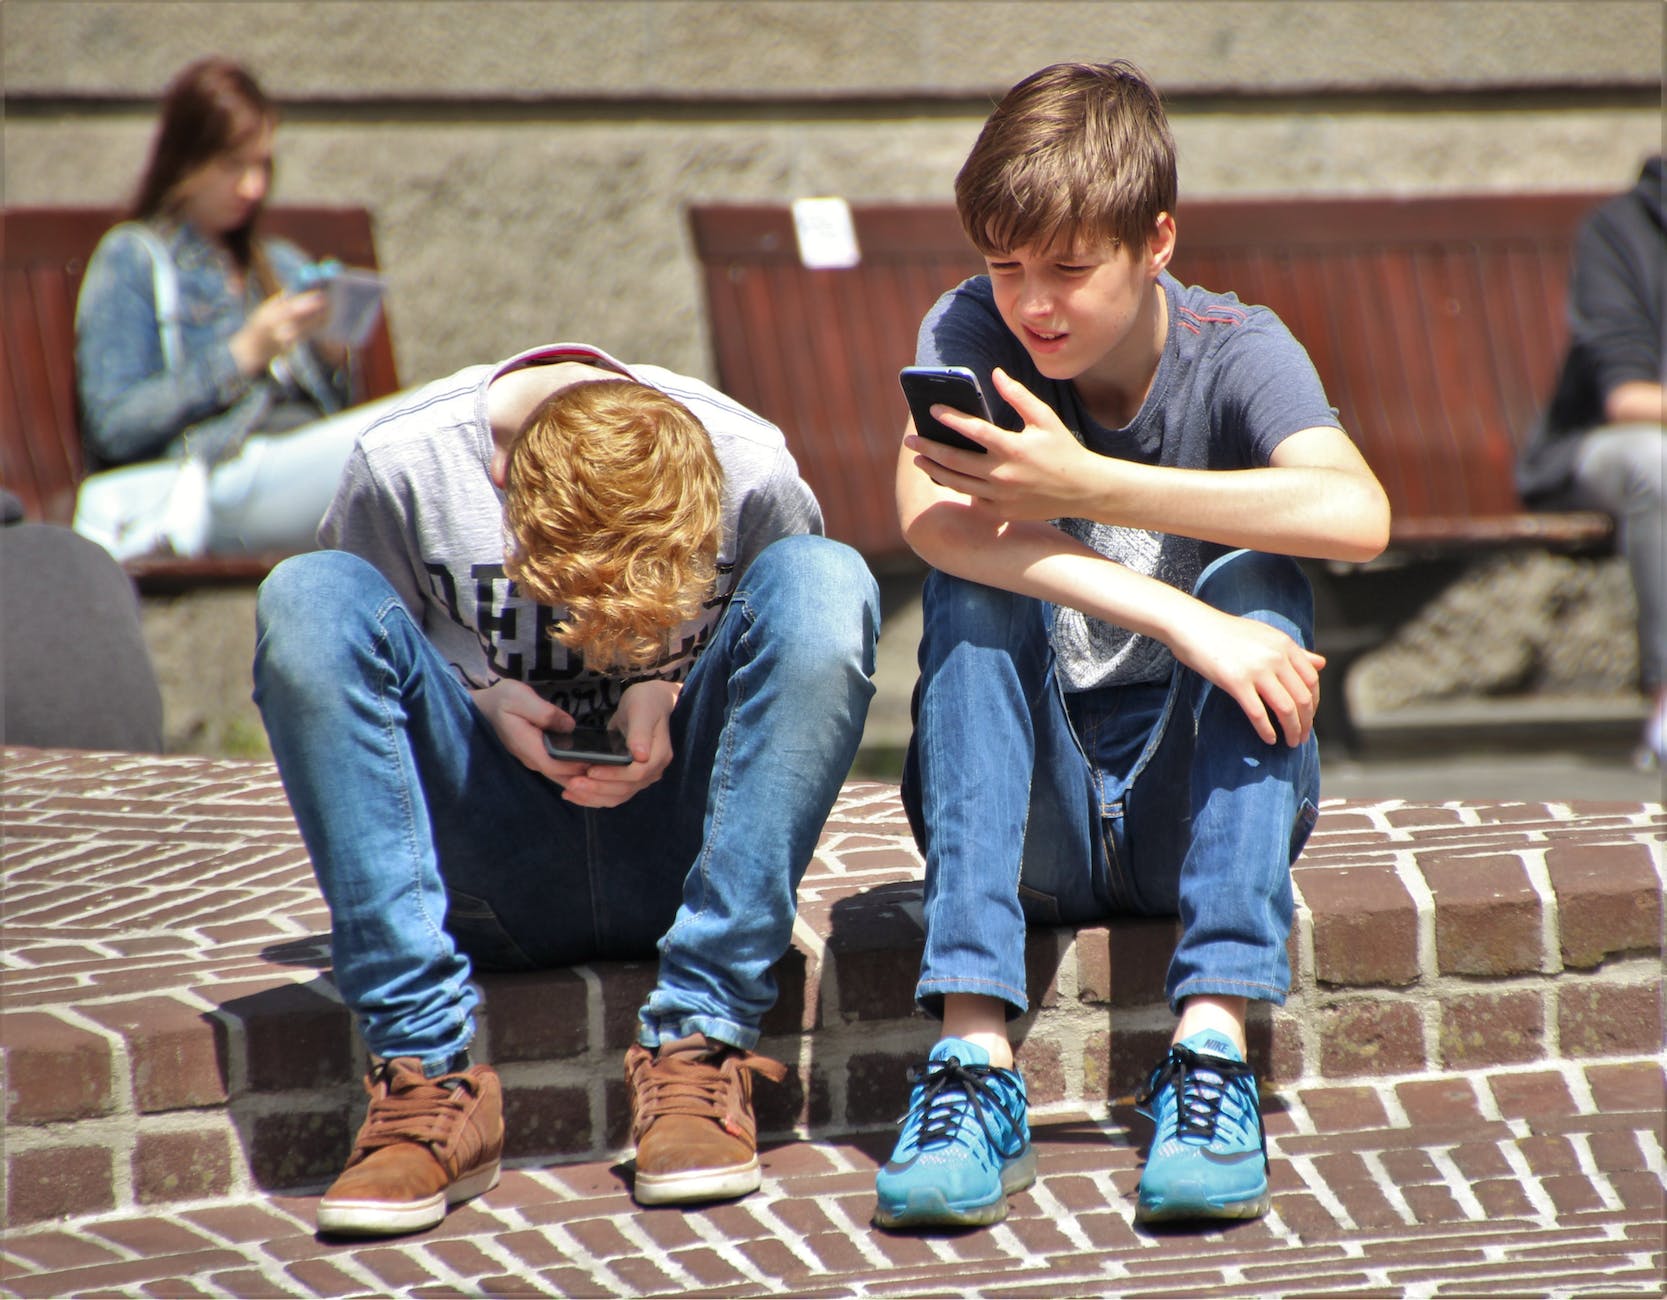 James Donaldson on Mental Health – When Should You Get Your Kid a Phone?